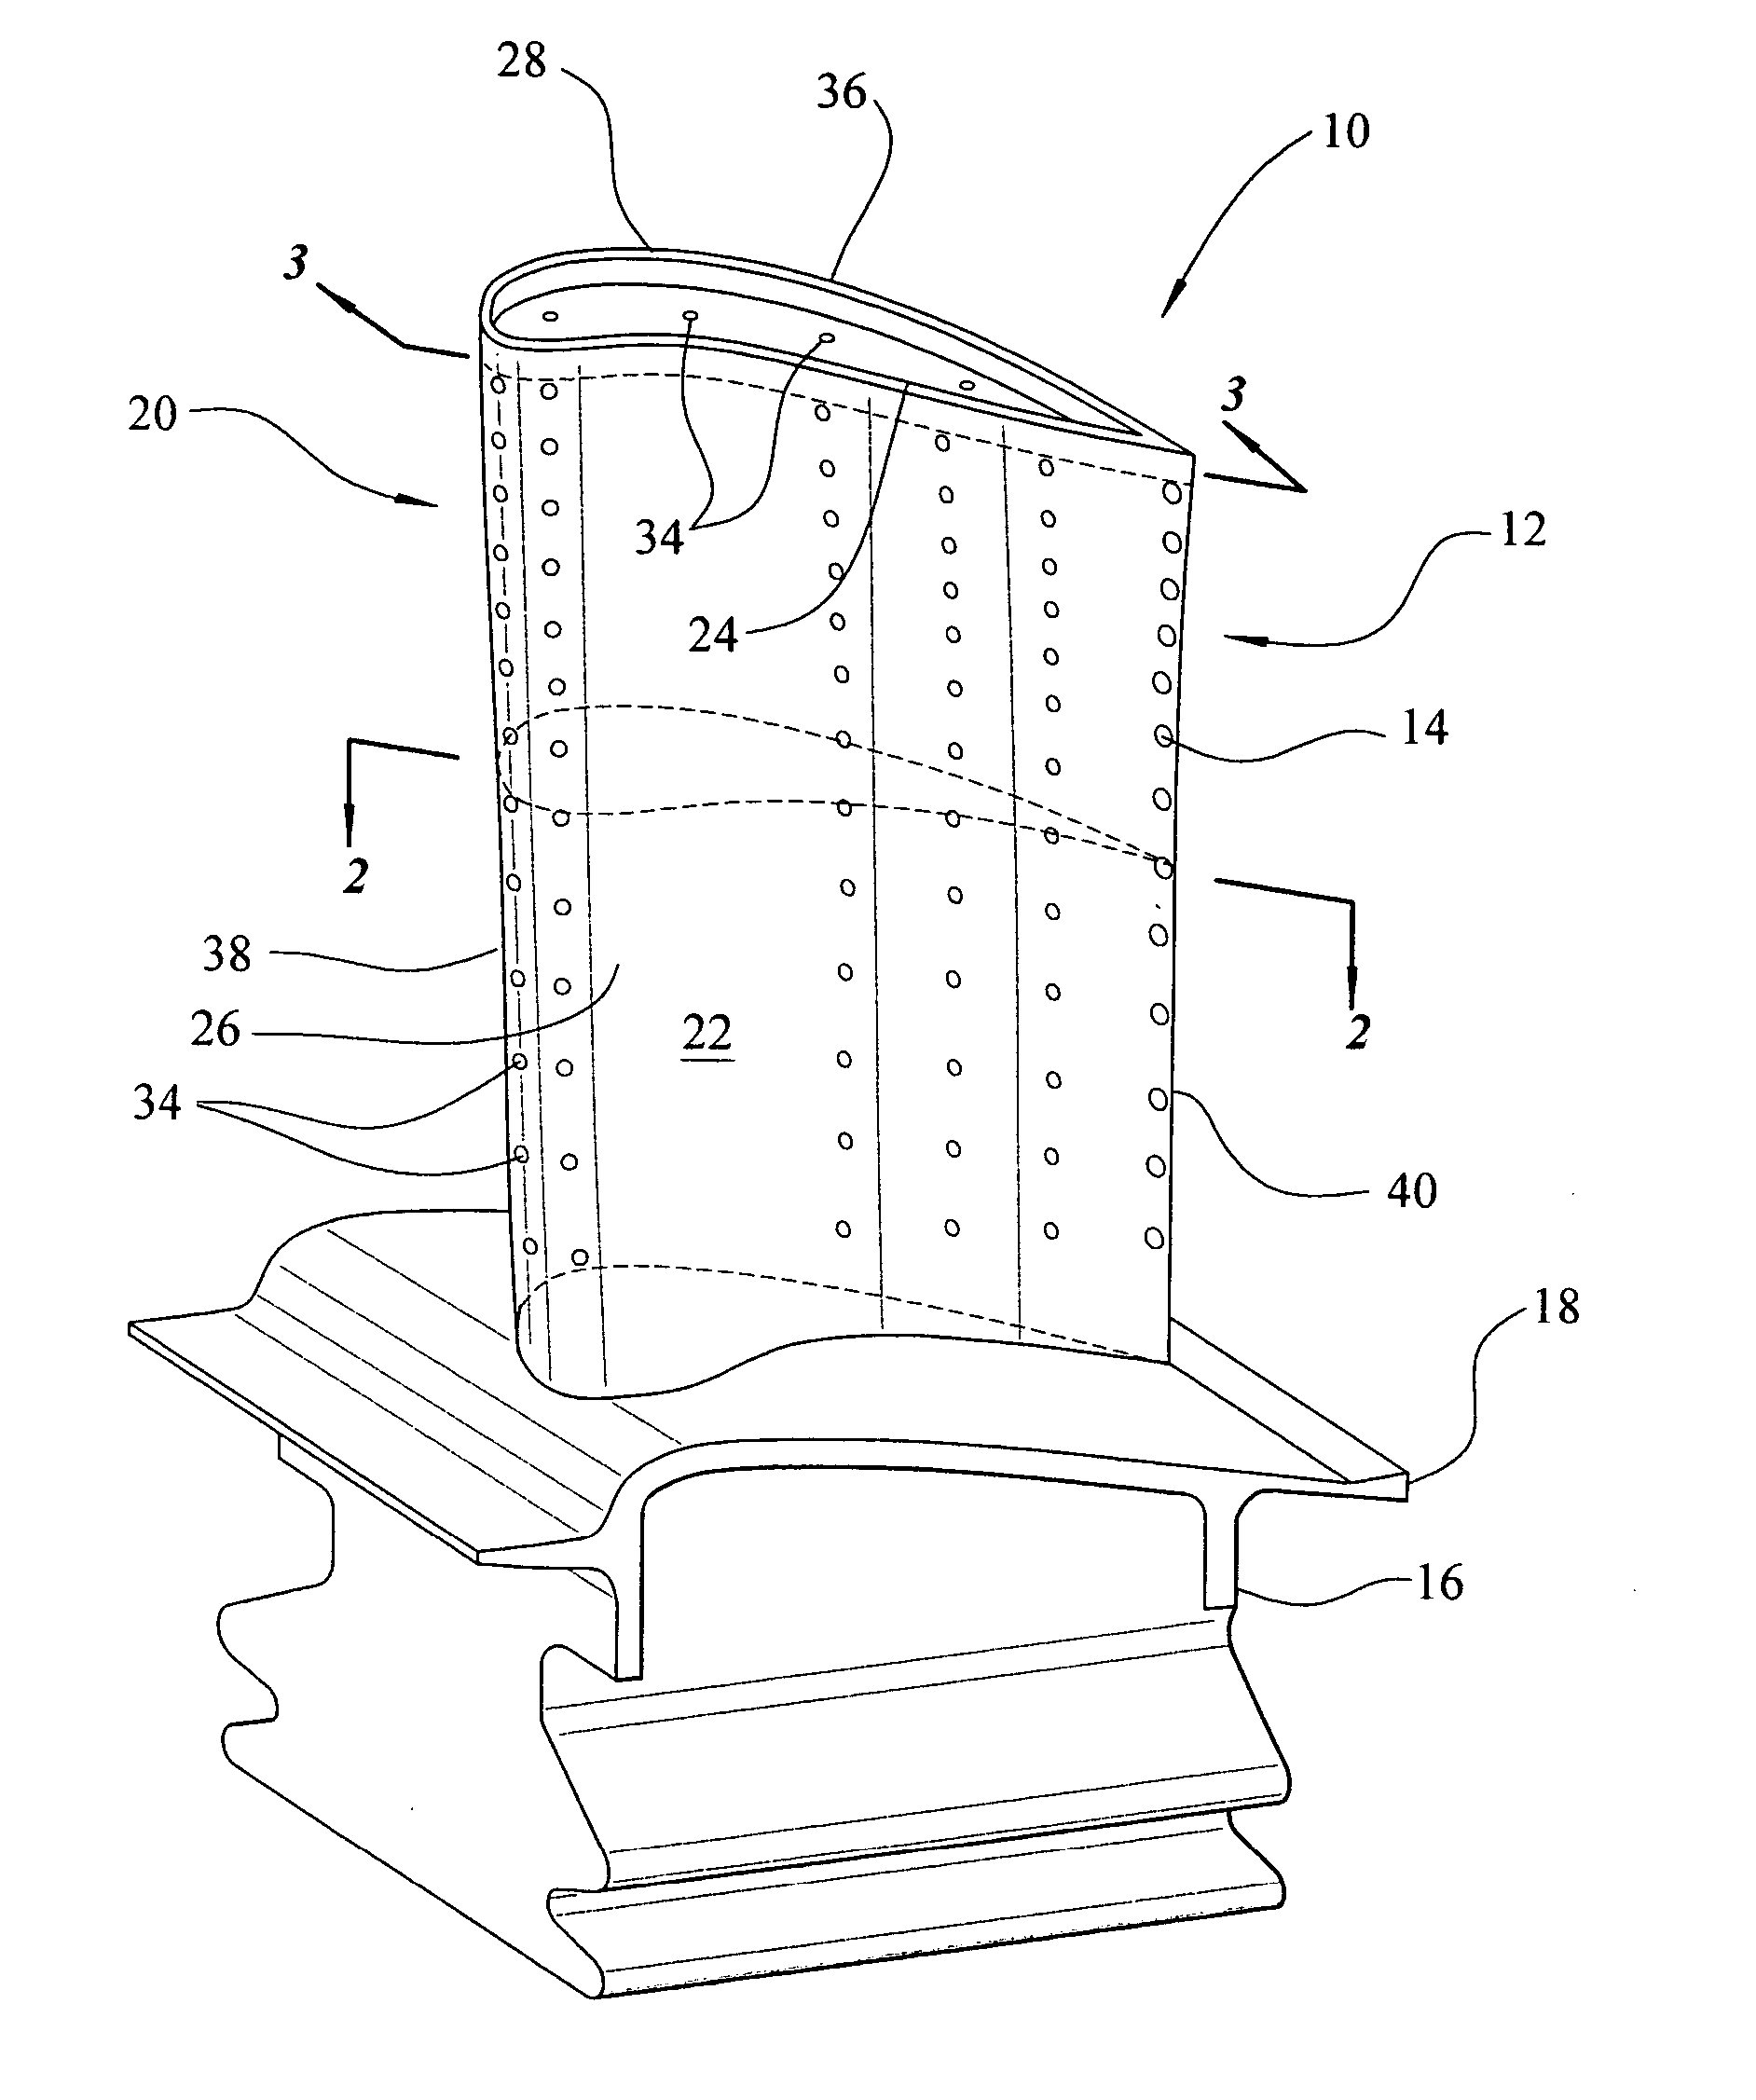 Cooling system for a turbine blade